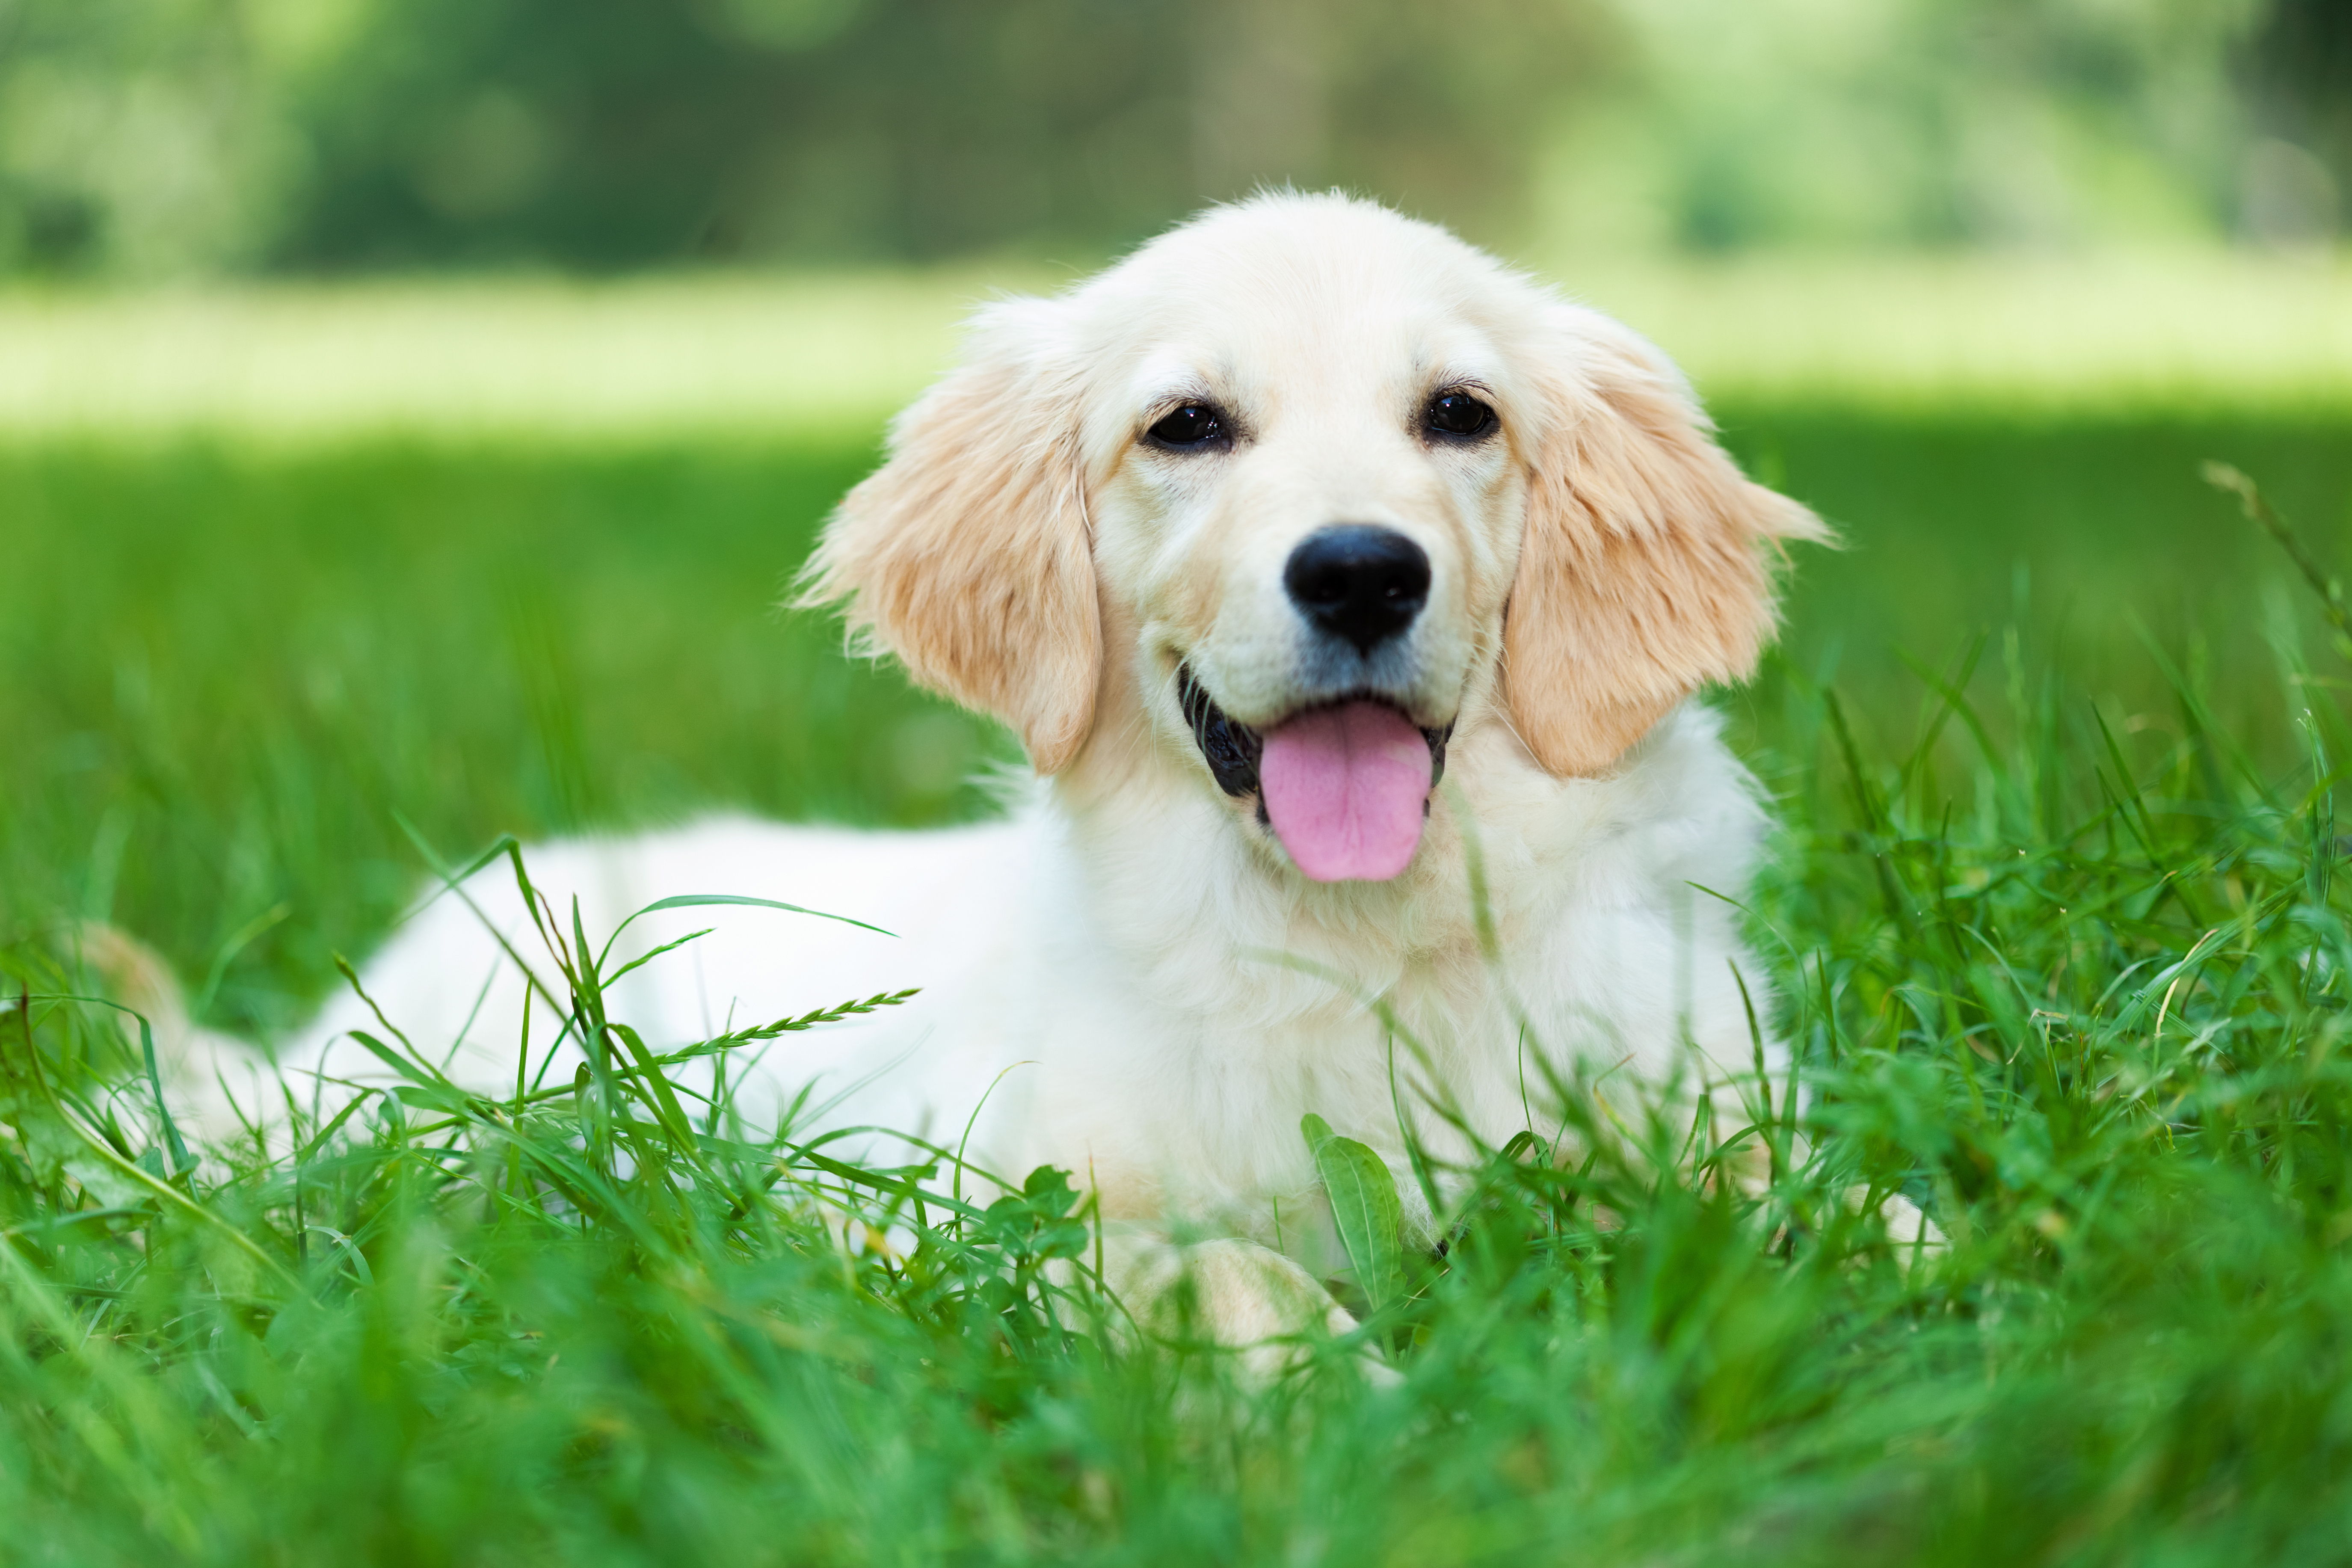 Is it ok for my dog to eat grass? - Santa Barbara Pet sitters and ...